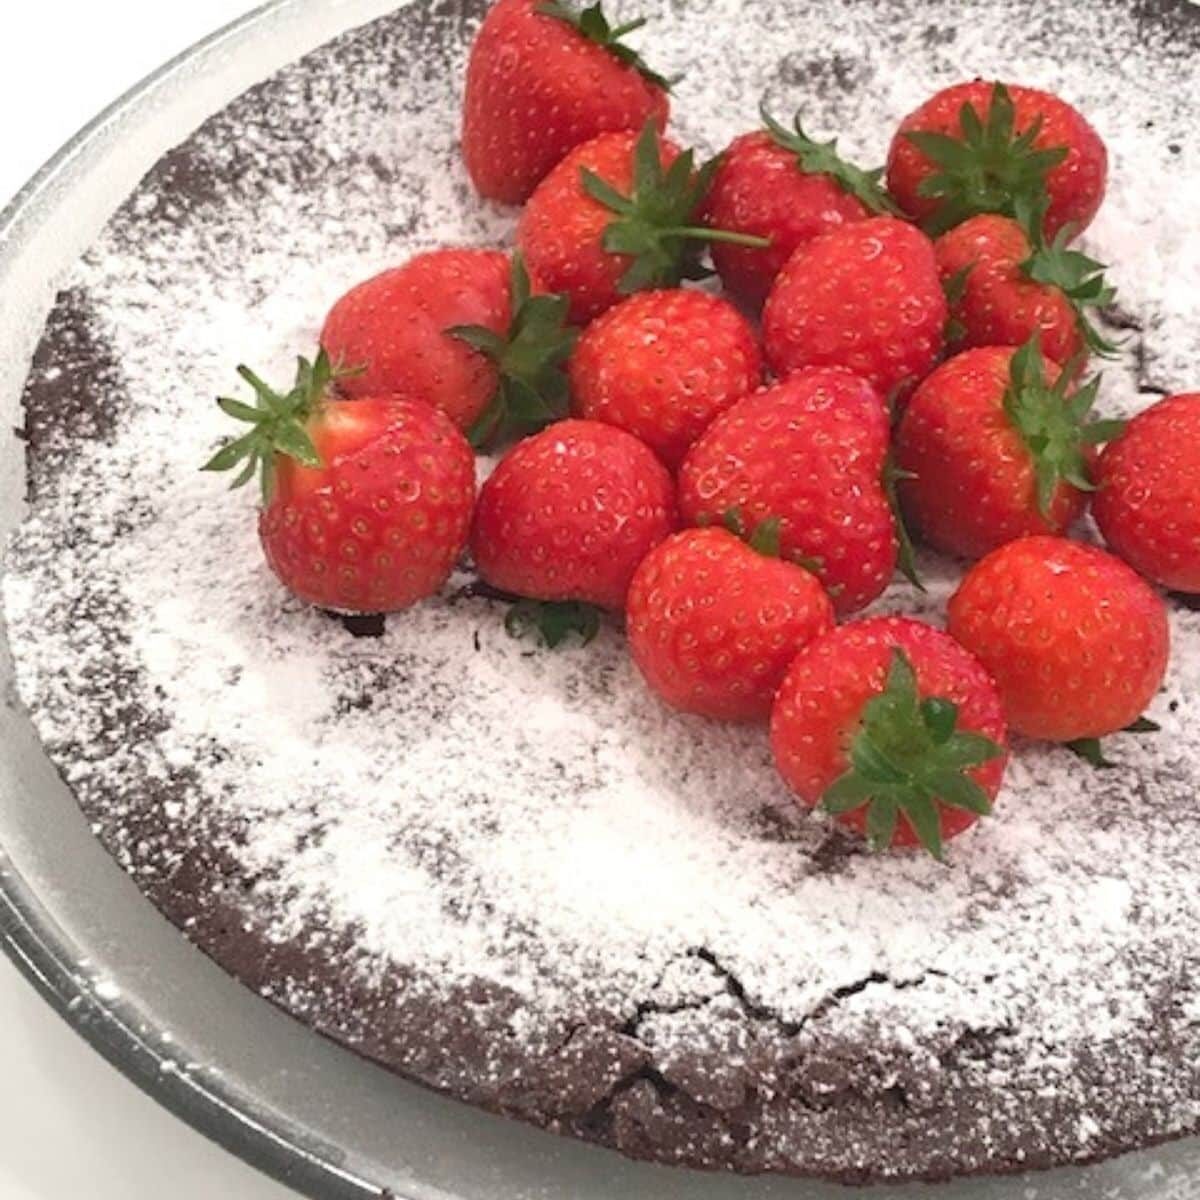 Kladdkaka on glass plate dusted with powdered sugar and whole strawberries